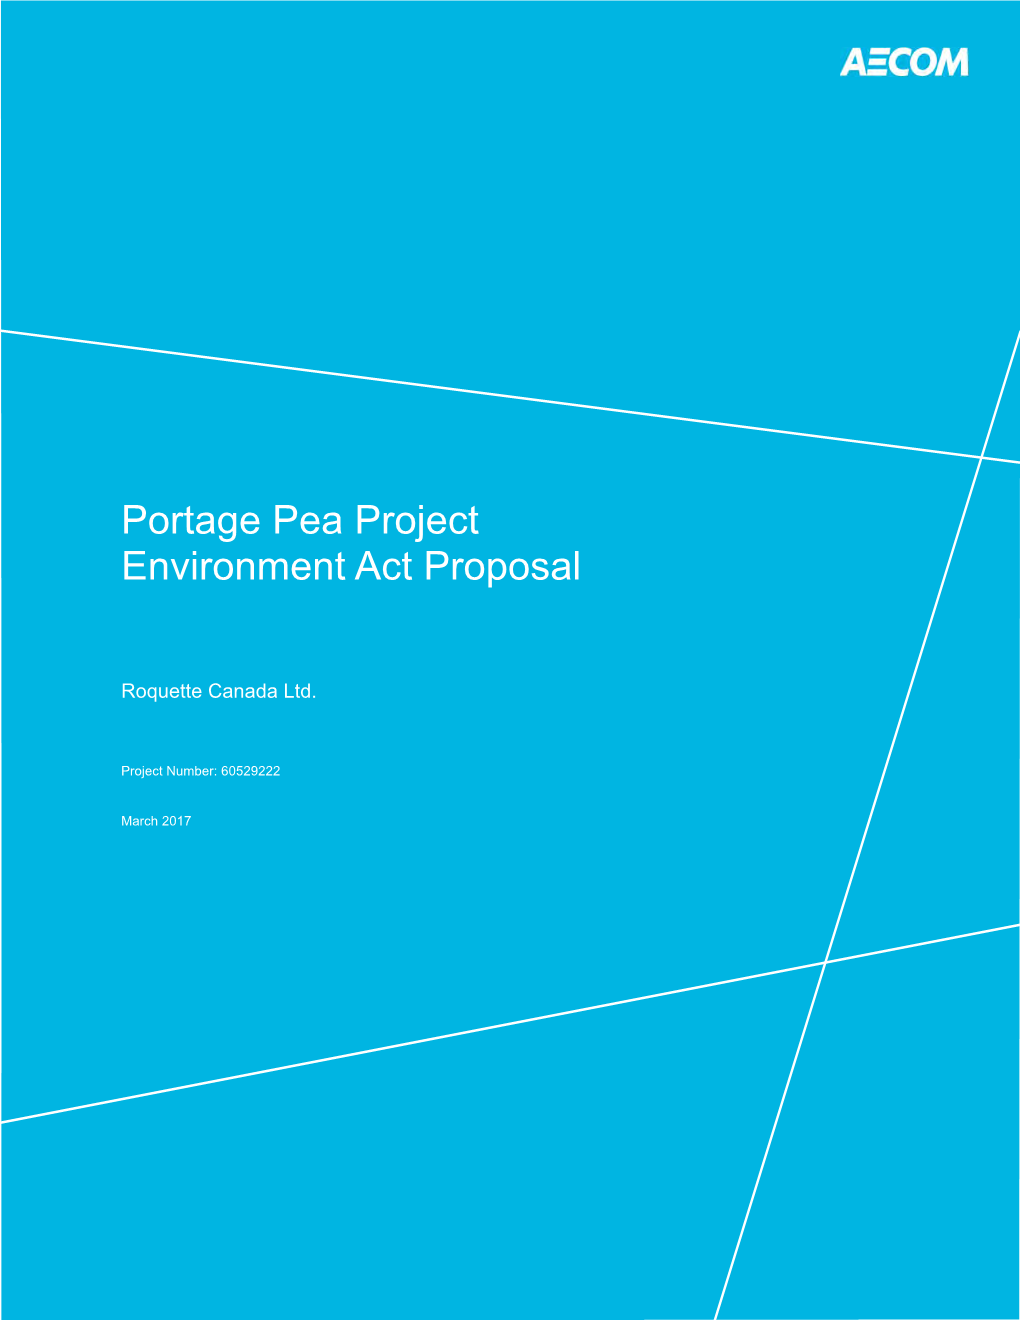 Portage Pea Project Environment Act Proposal